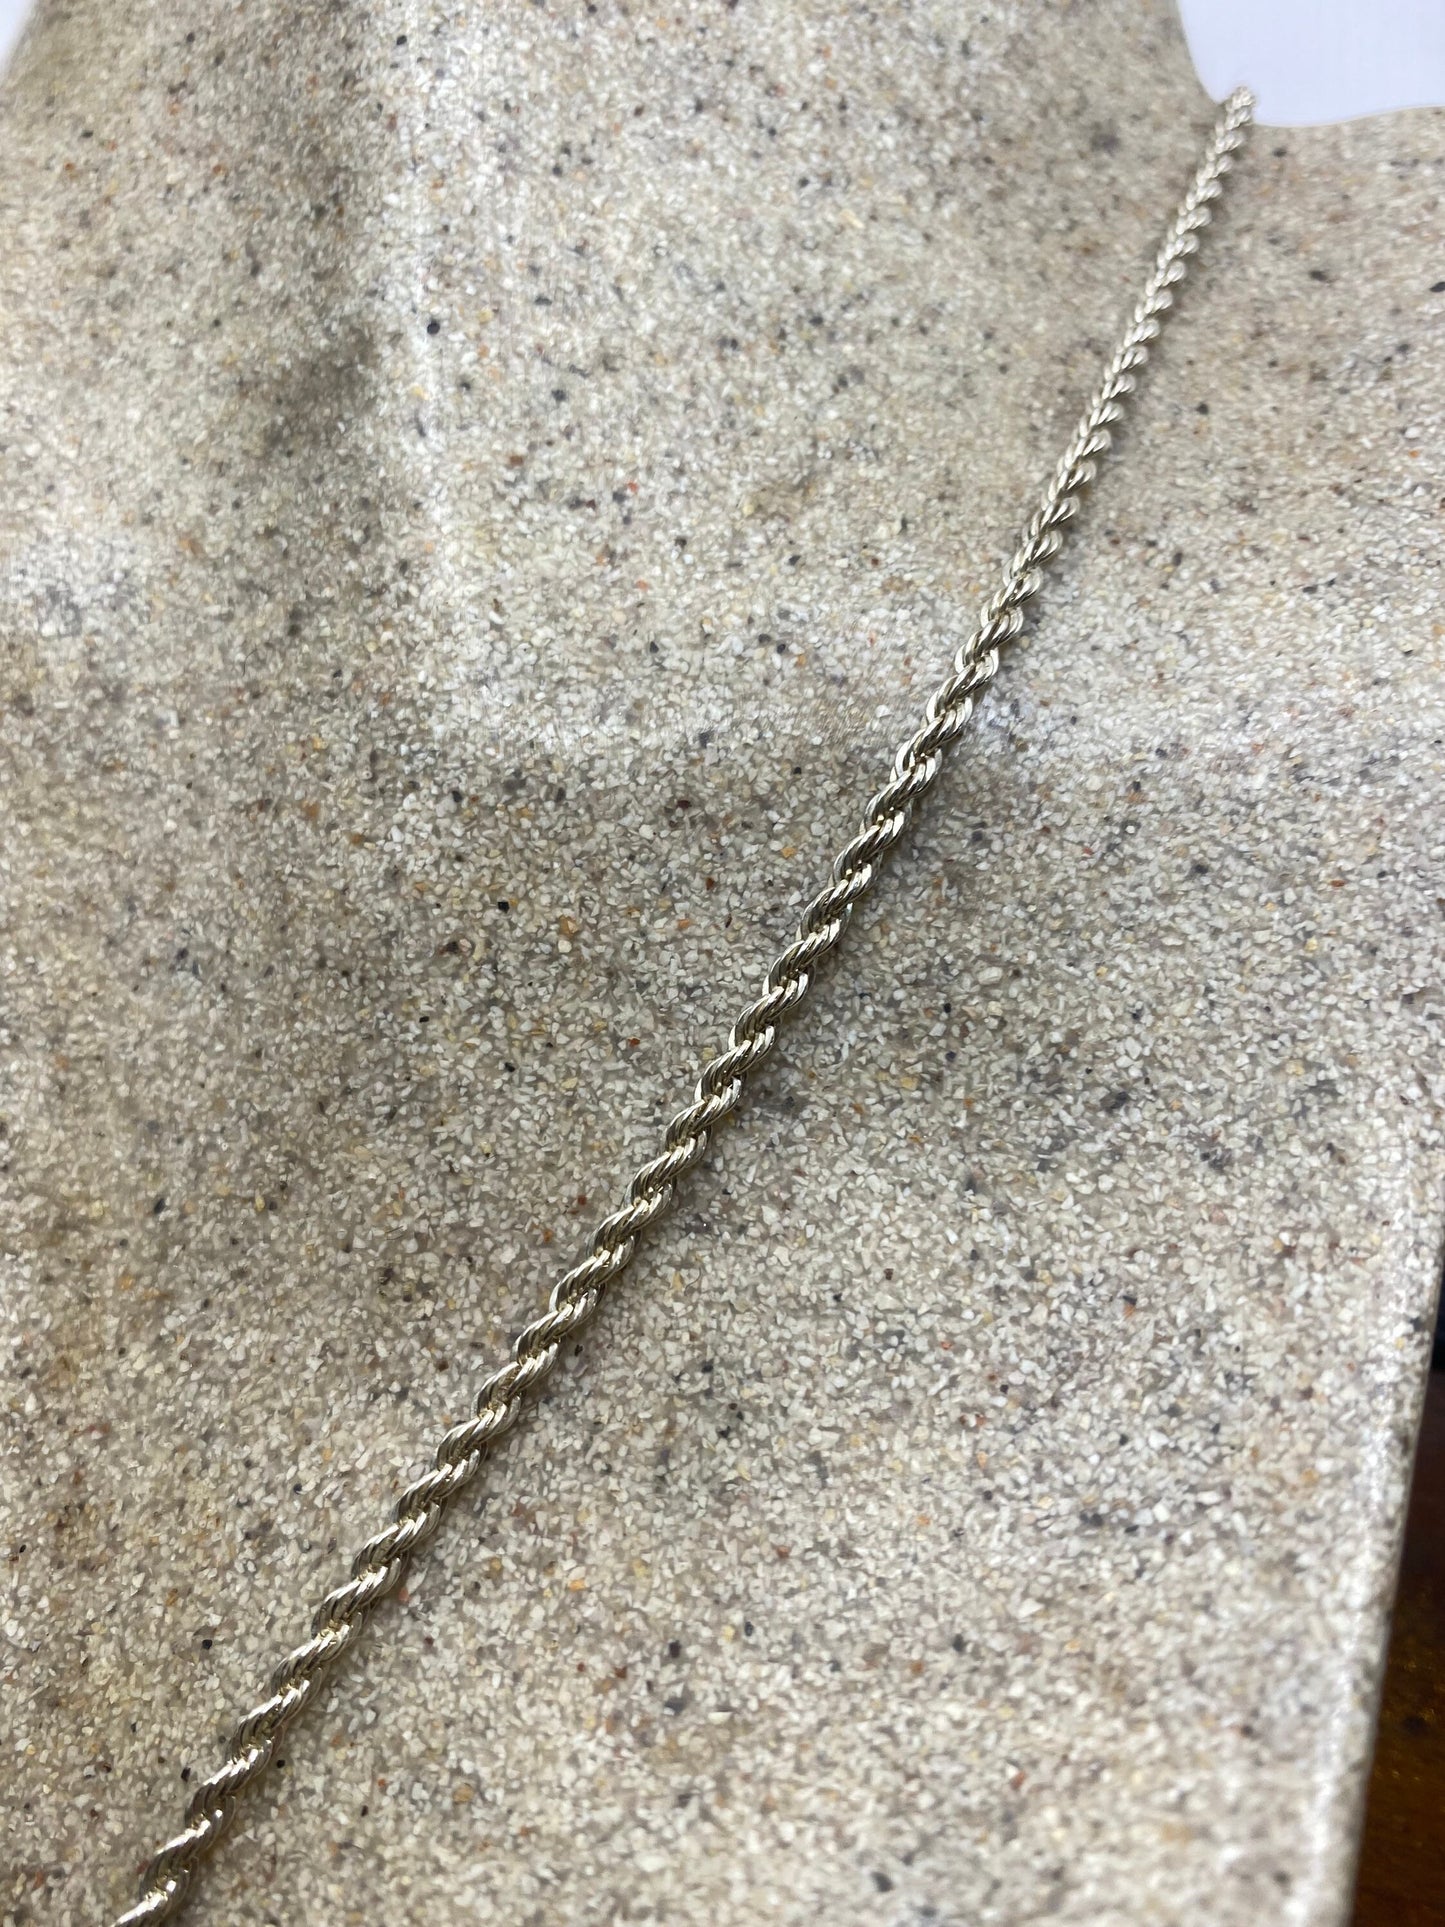 Vintage Chain 22 Inch 925 Sterling Silver Necklace